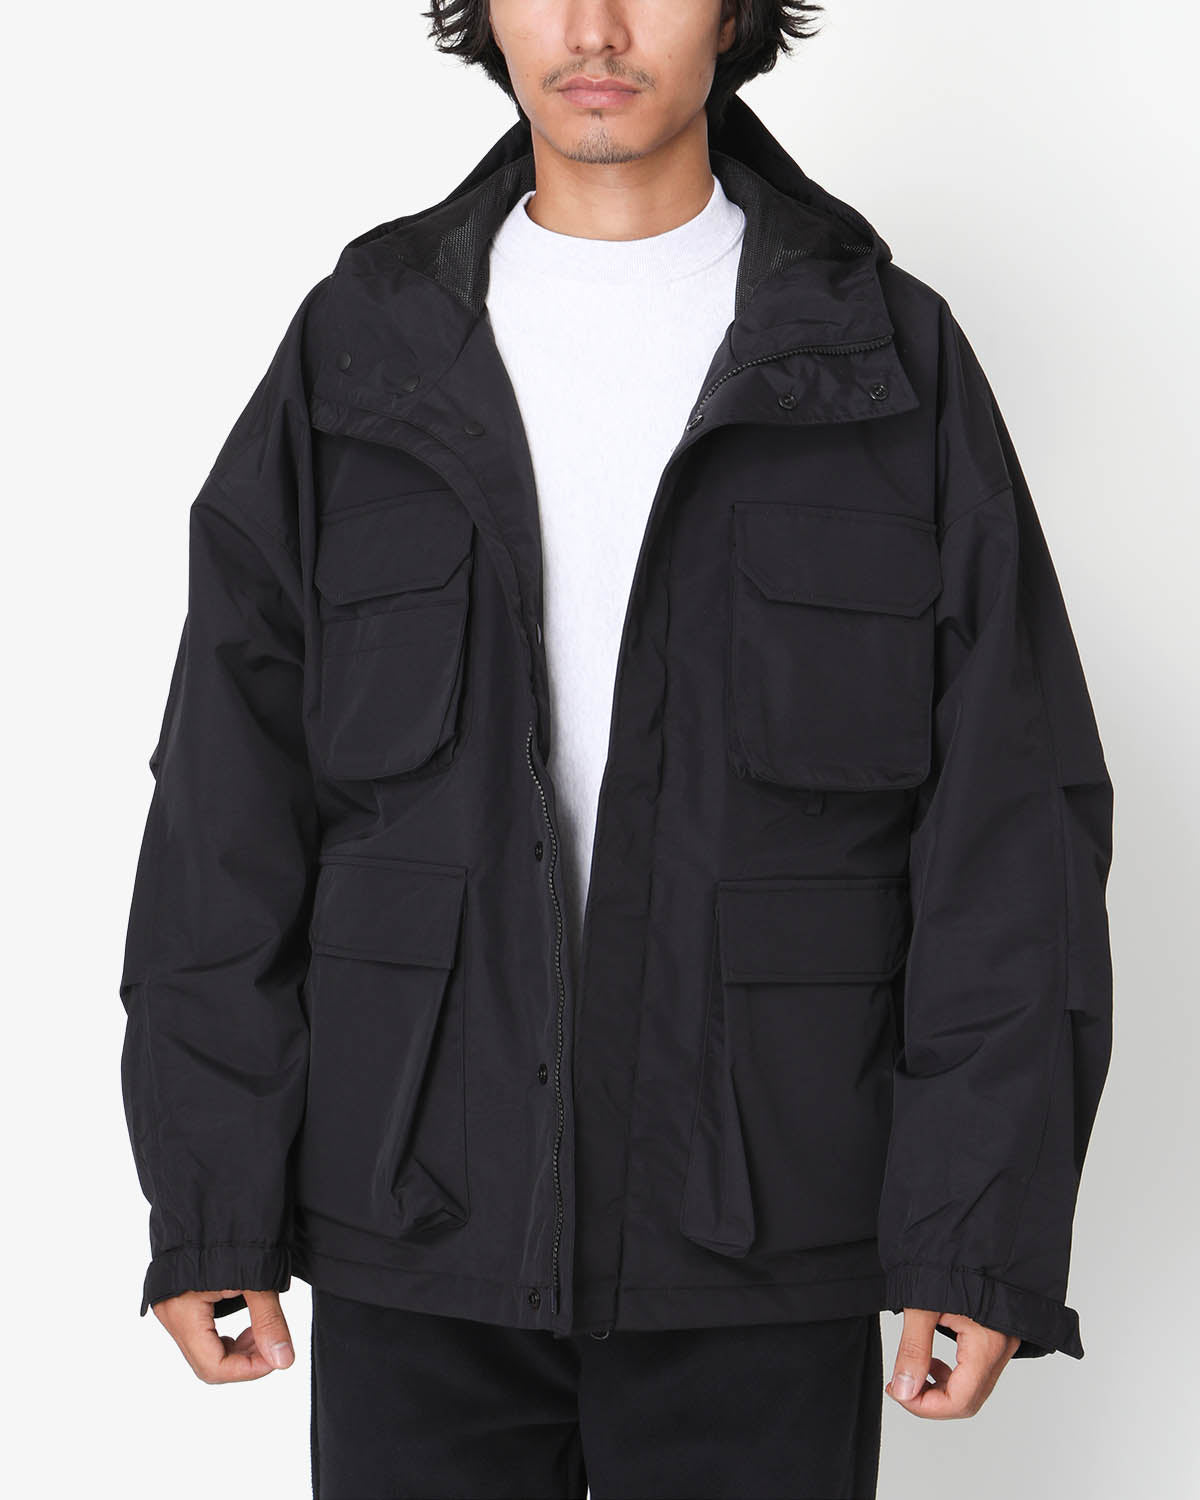 3LAYER GUIDE JACKET – COVERCHORD